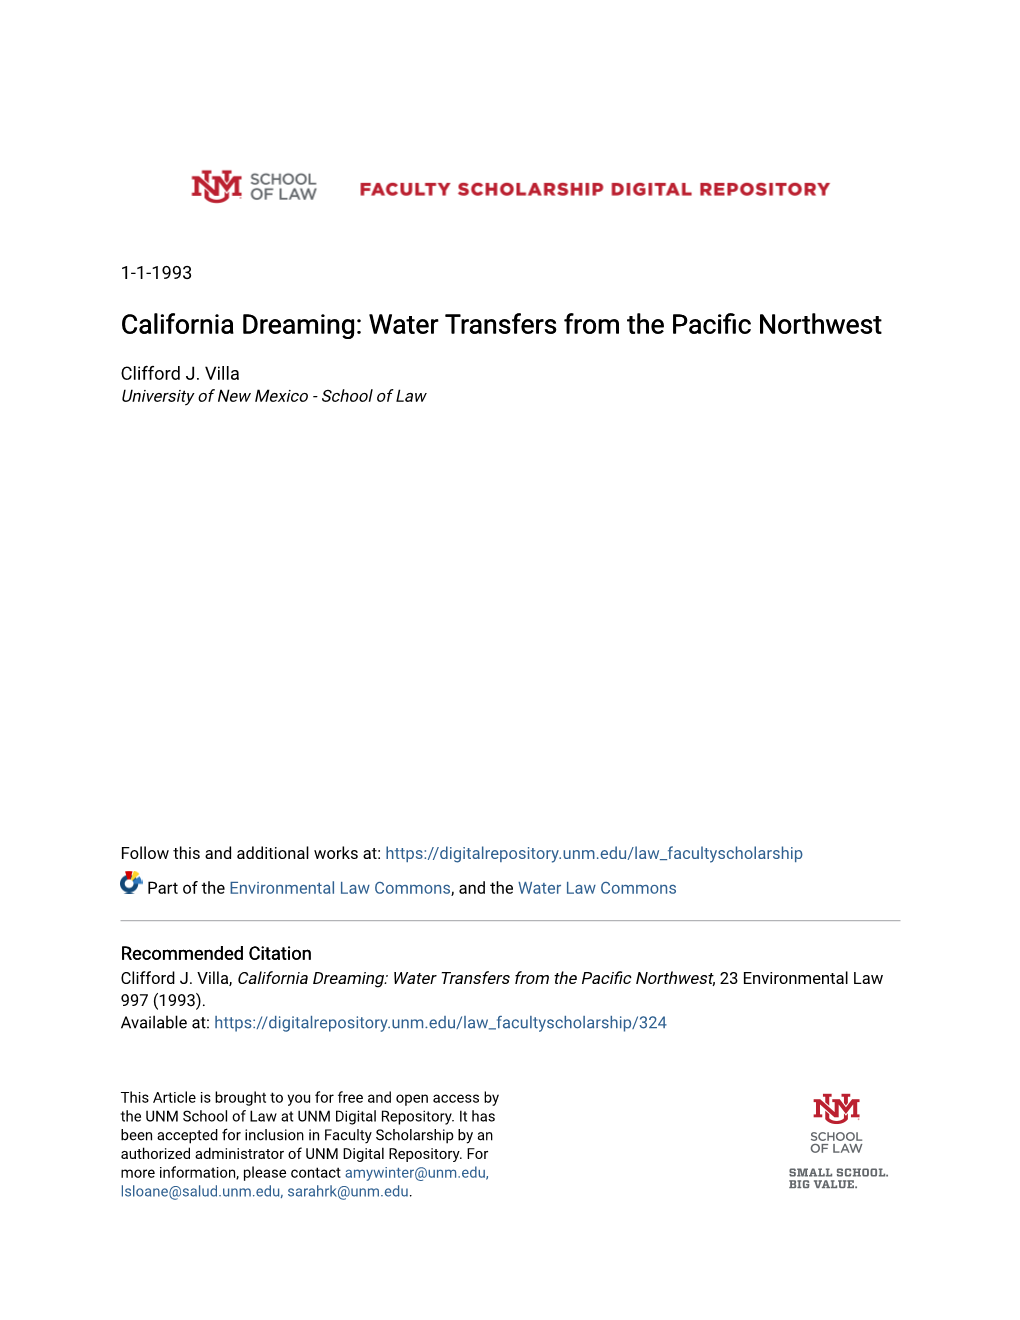 Water Transfers from the Pacific Northwest